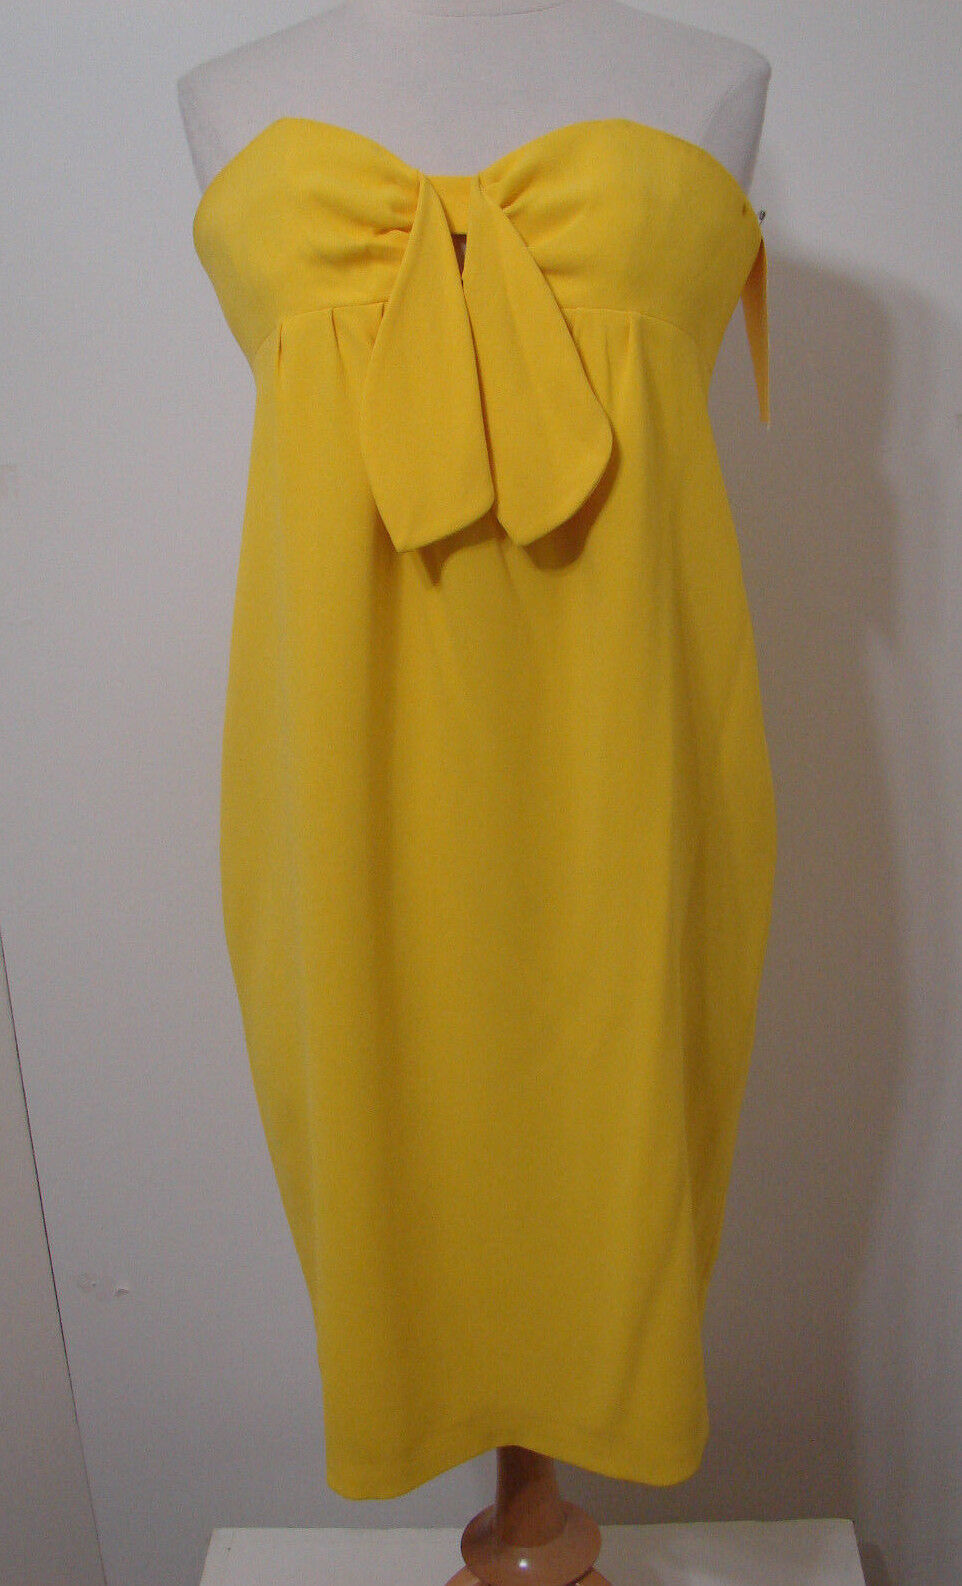 Primary image for TORY BURCH Dress Yellow Strapless Knot Front "JADA" 8